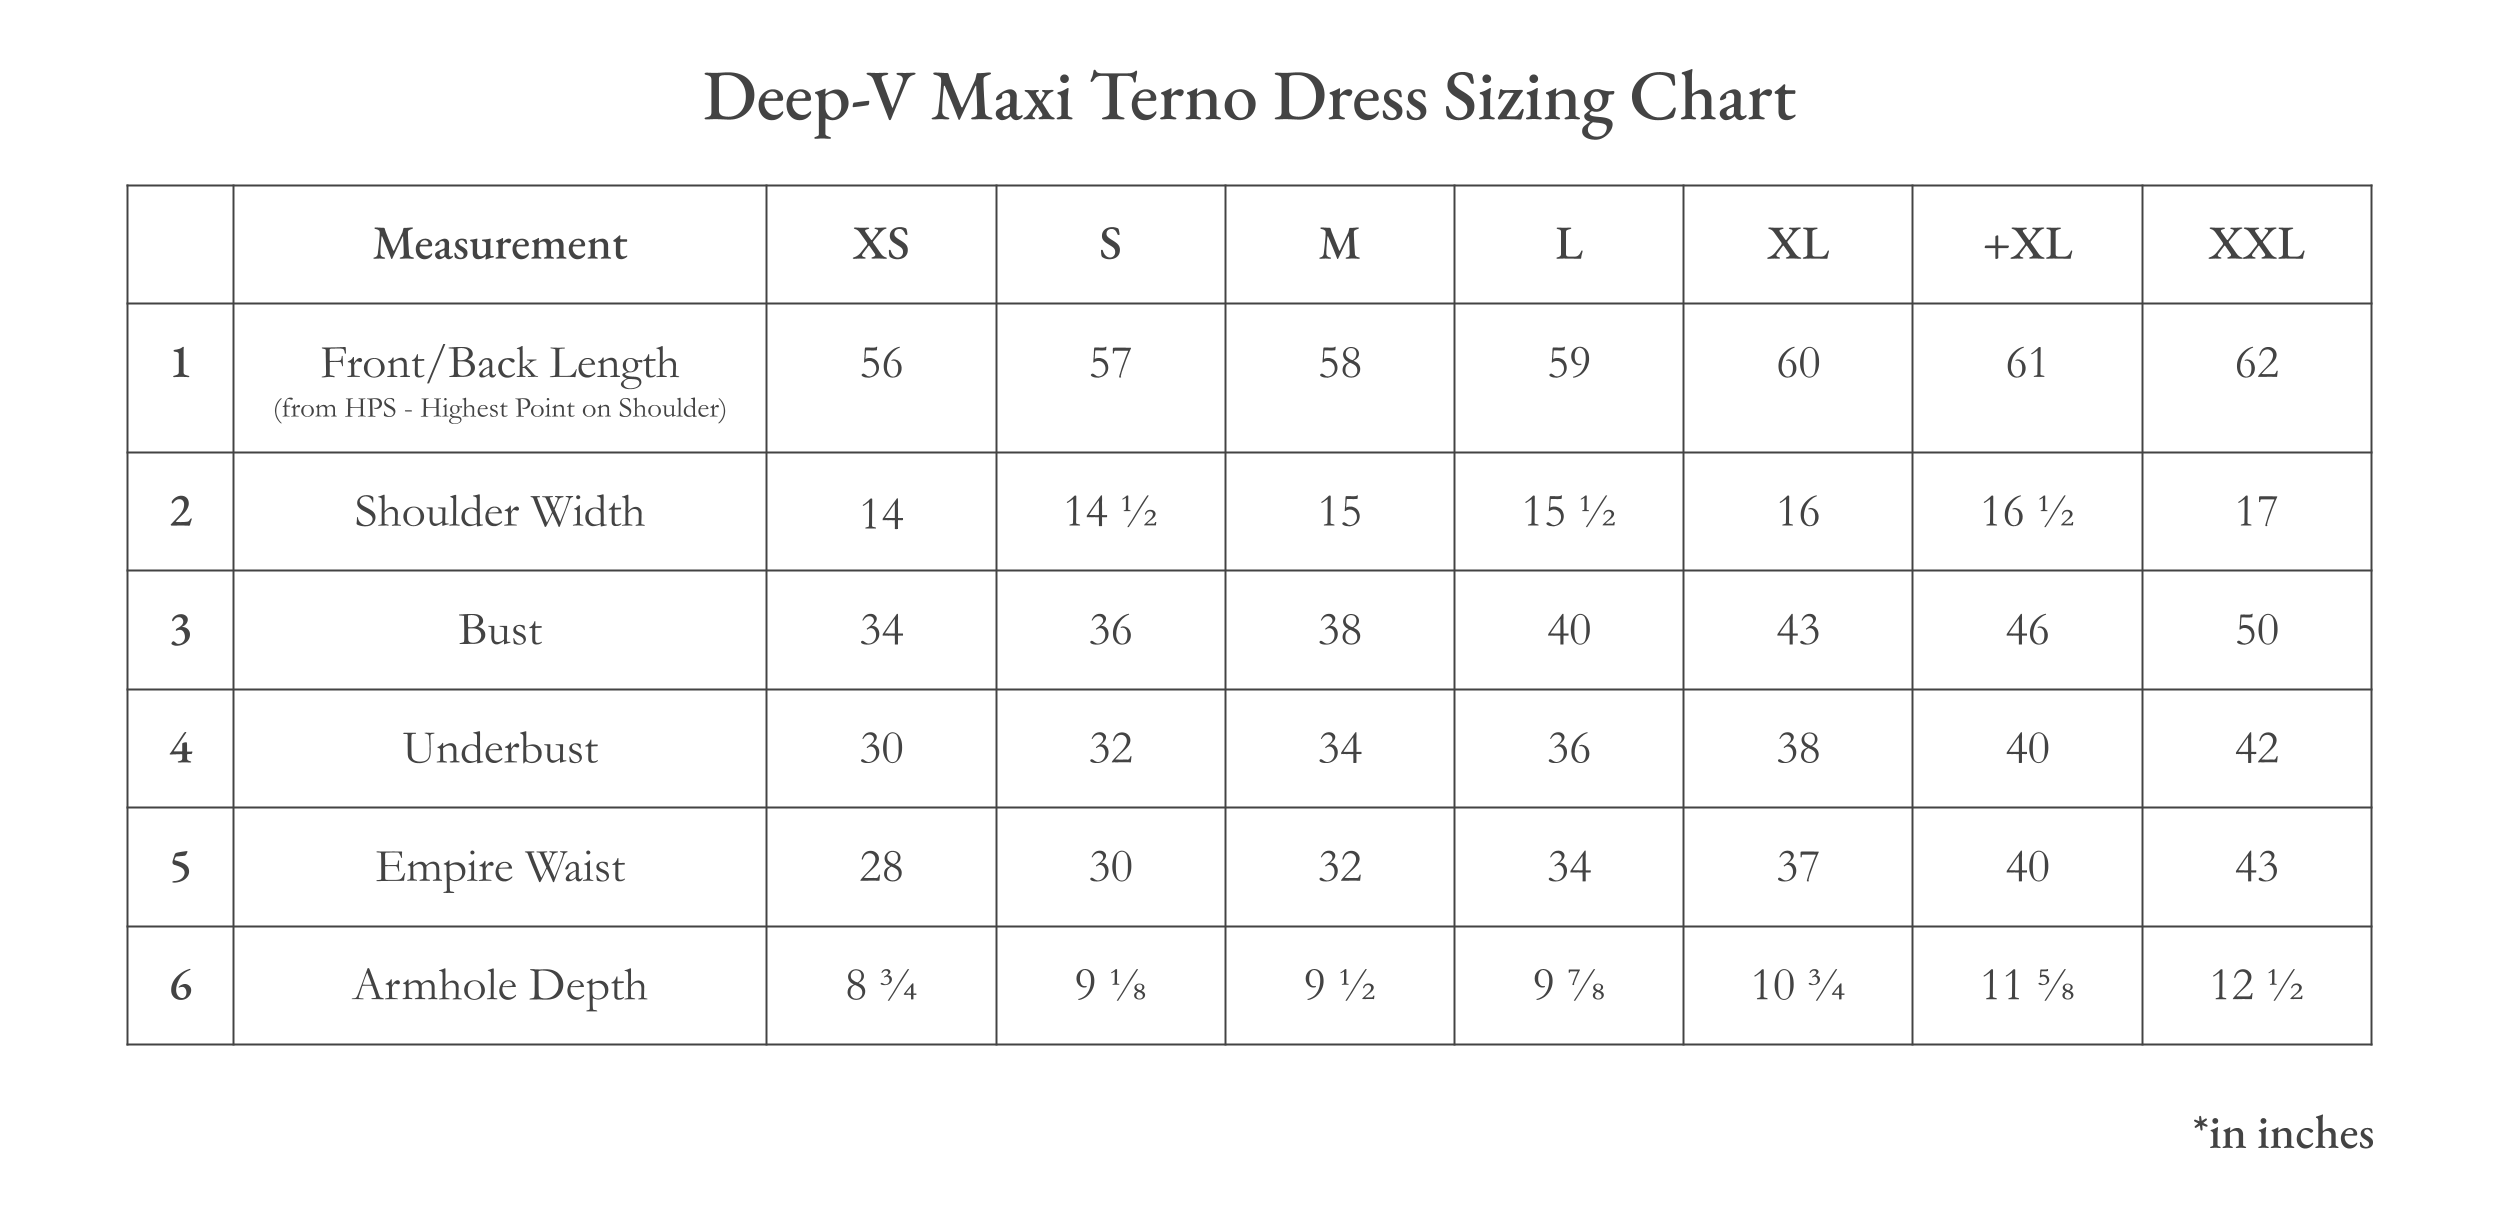 Vinta Deep-V Maxi Terno Dress (Ivory with Lace Overlay on Sleeves) Size Chart